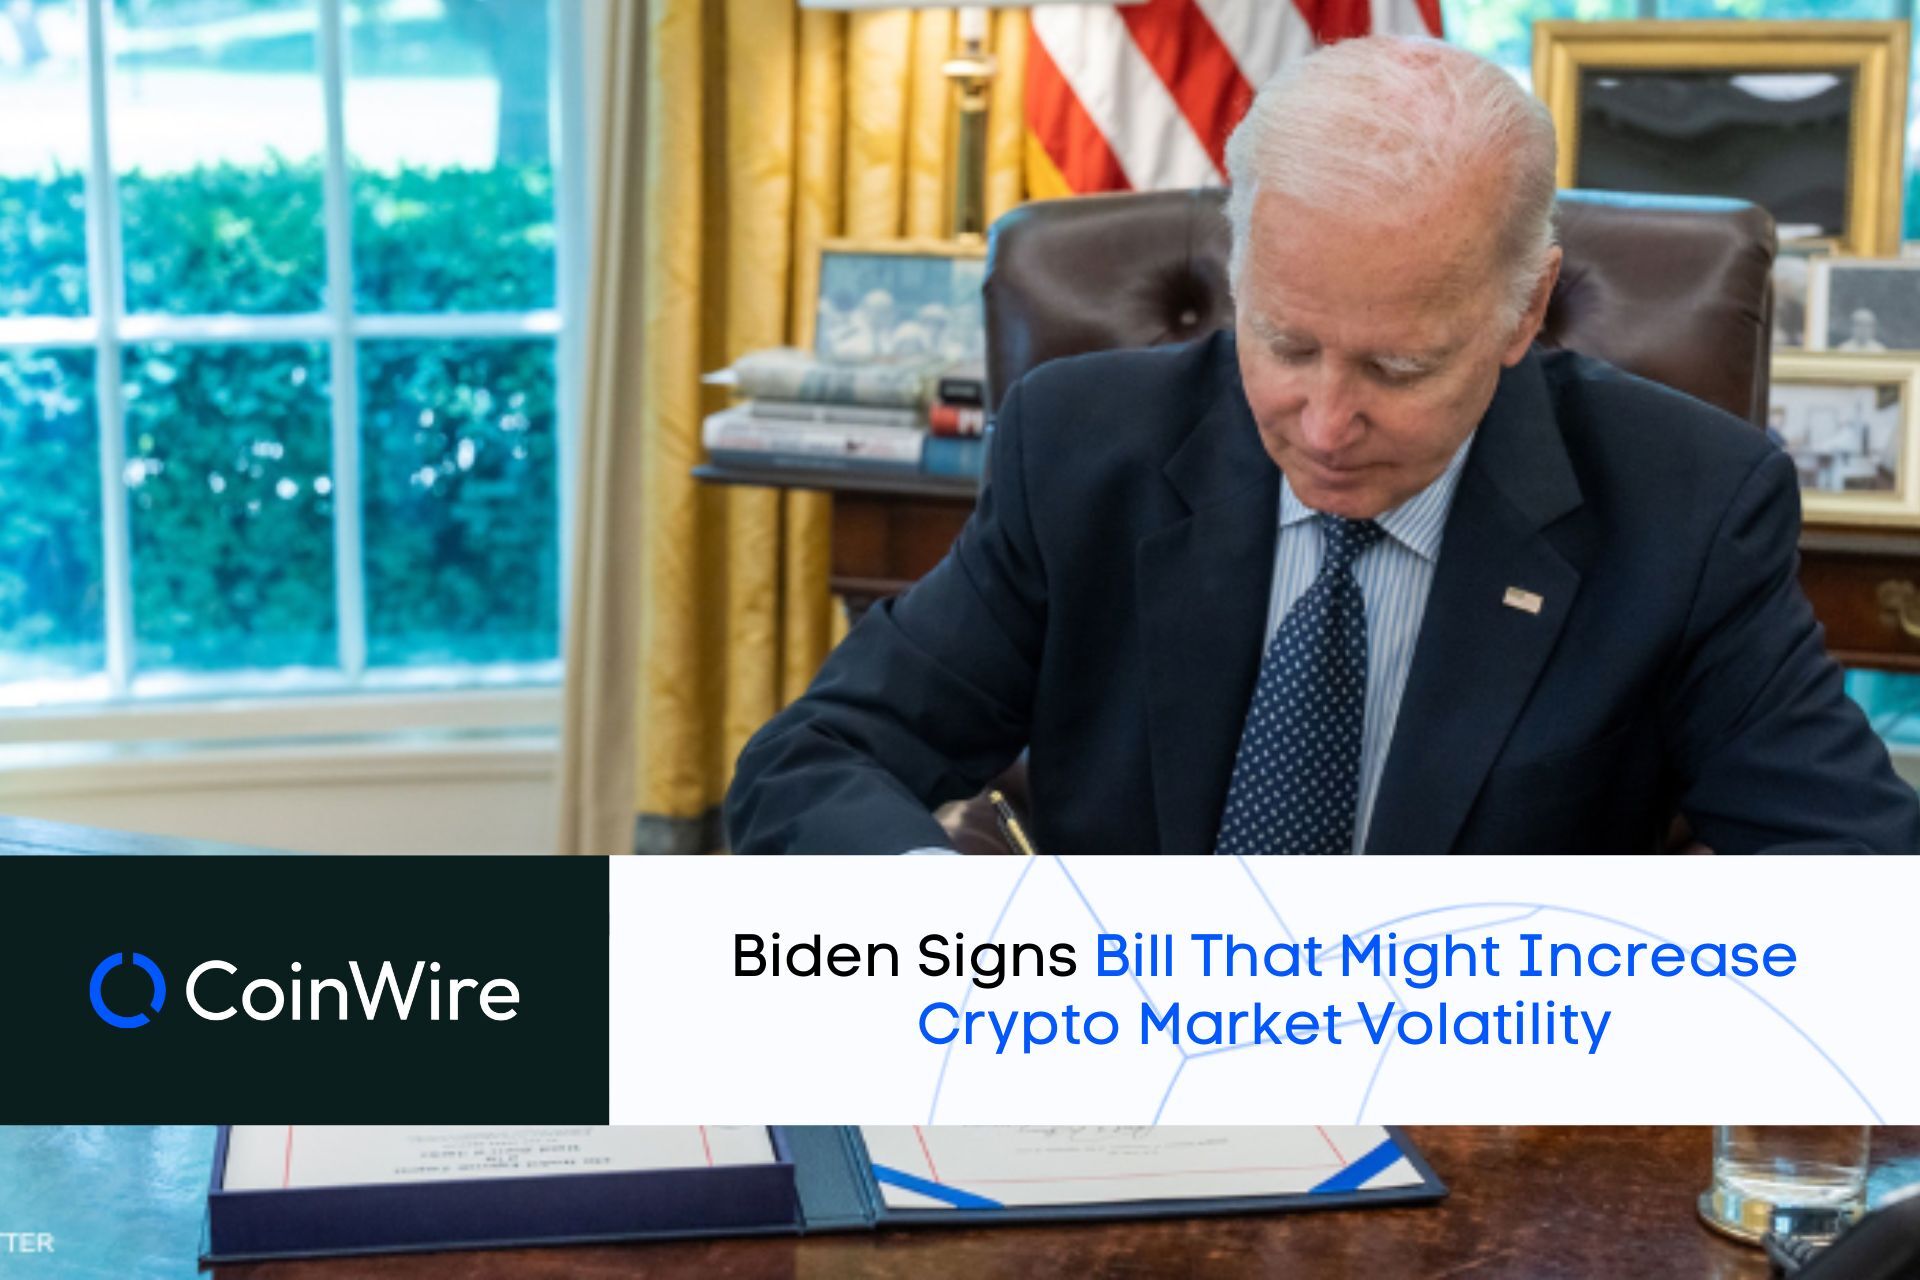 Biden Signs New Debt Ceiling Bill That Might Increase Crypto Market Volatility